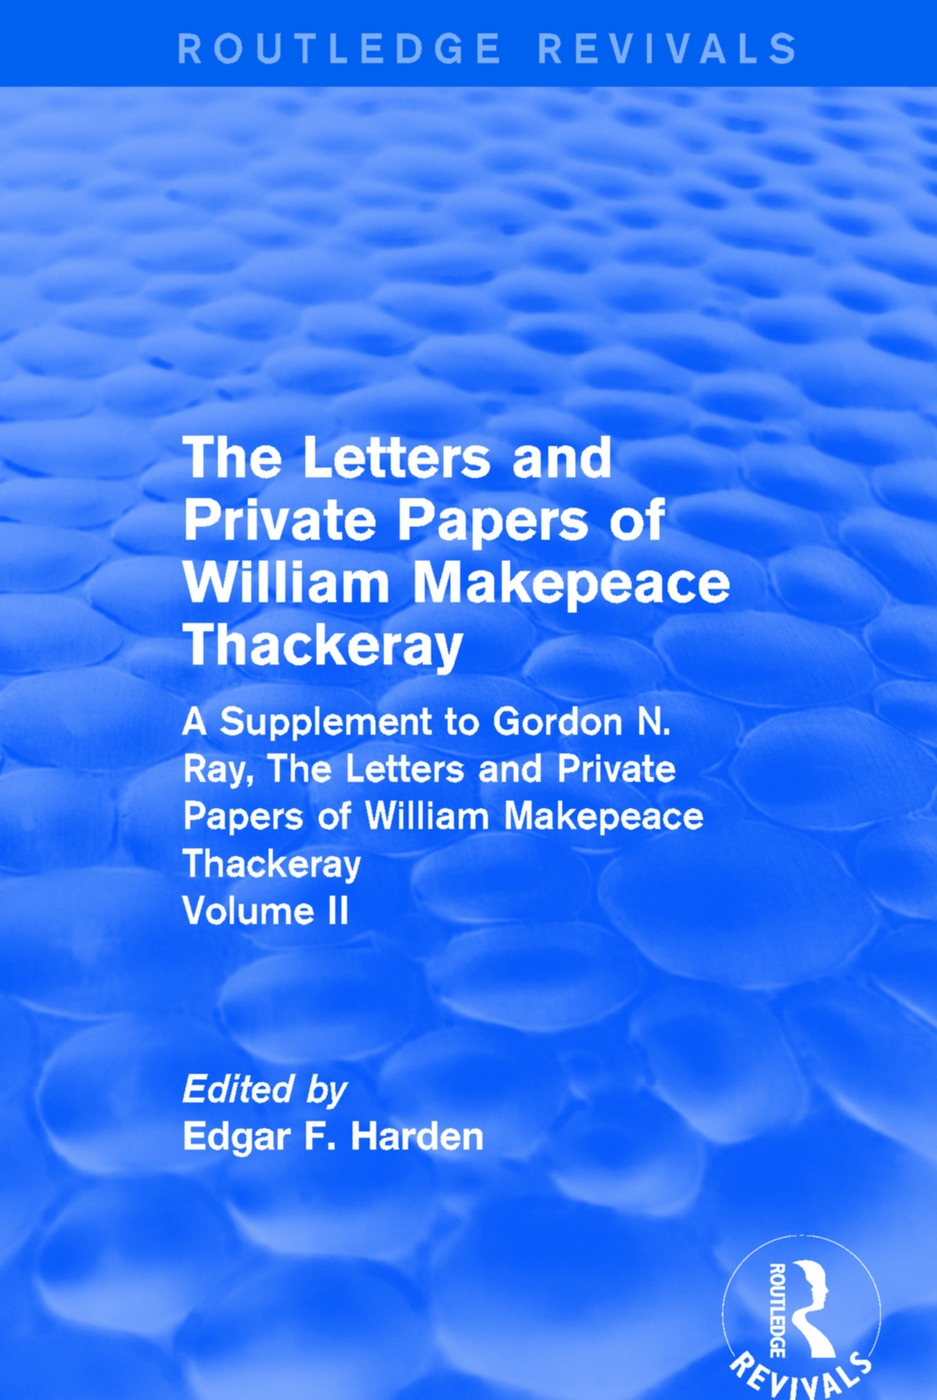 Routledge Revivals: The Letters and Private Papers of William Makepeace Thackeray, Volume II (1994): A Supplement to Gordon N. Ray, the Letters and Pr